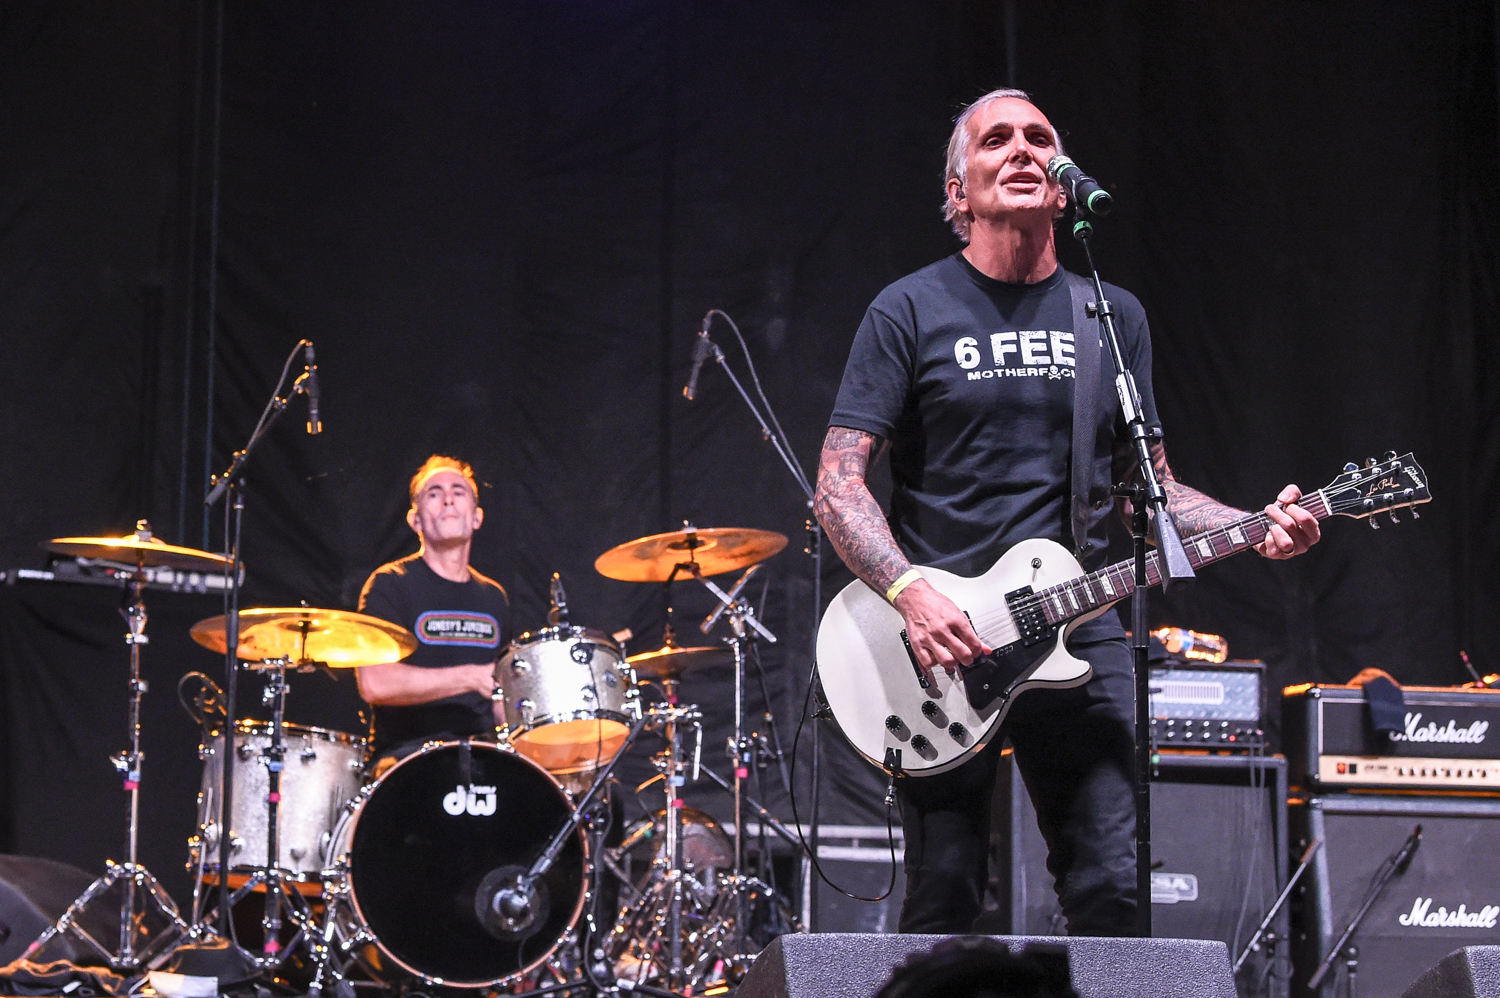 Brian Nolan (L) and Art Alexakis (R) with the band Everclear perform in a socially distancing concert at the HEB Center at Cedar Park, Cedar Park Texas on October 2, 2020. Photo © Manuel Nauta